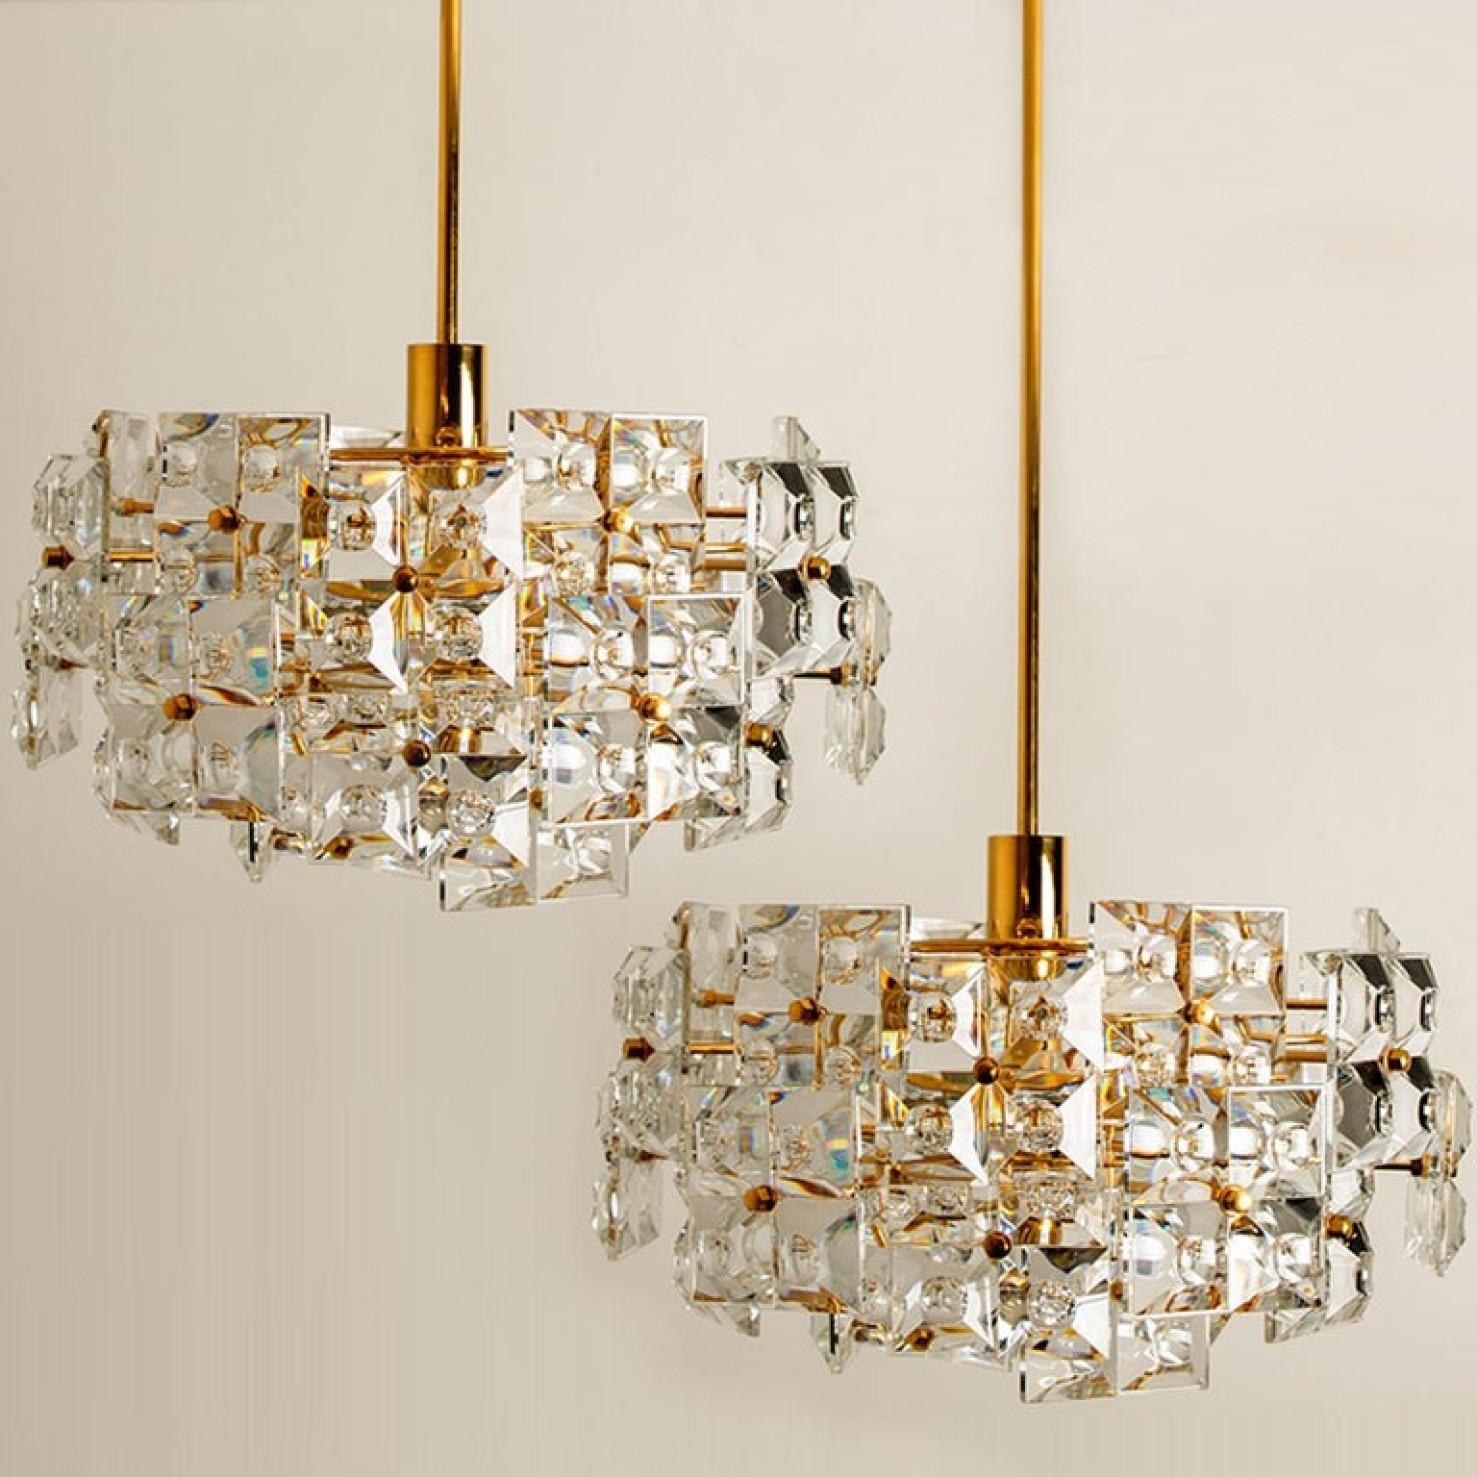 Pair of Kinkeldey Chandeliers, Gold-Plated Brass Crystal Glass, 1970 For Sale 3